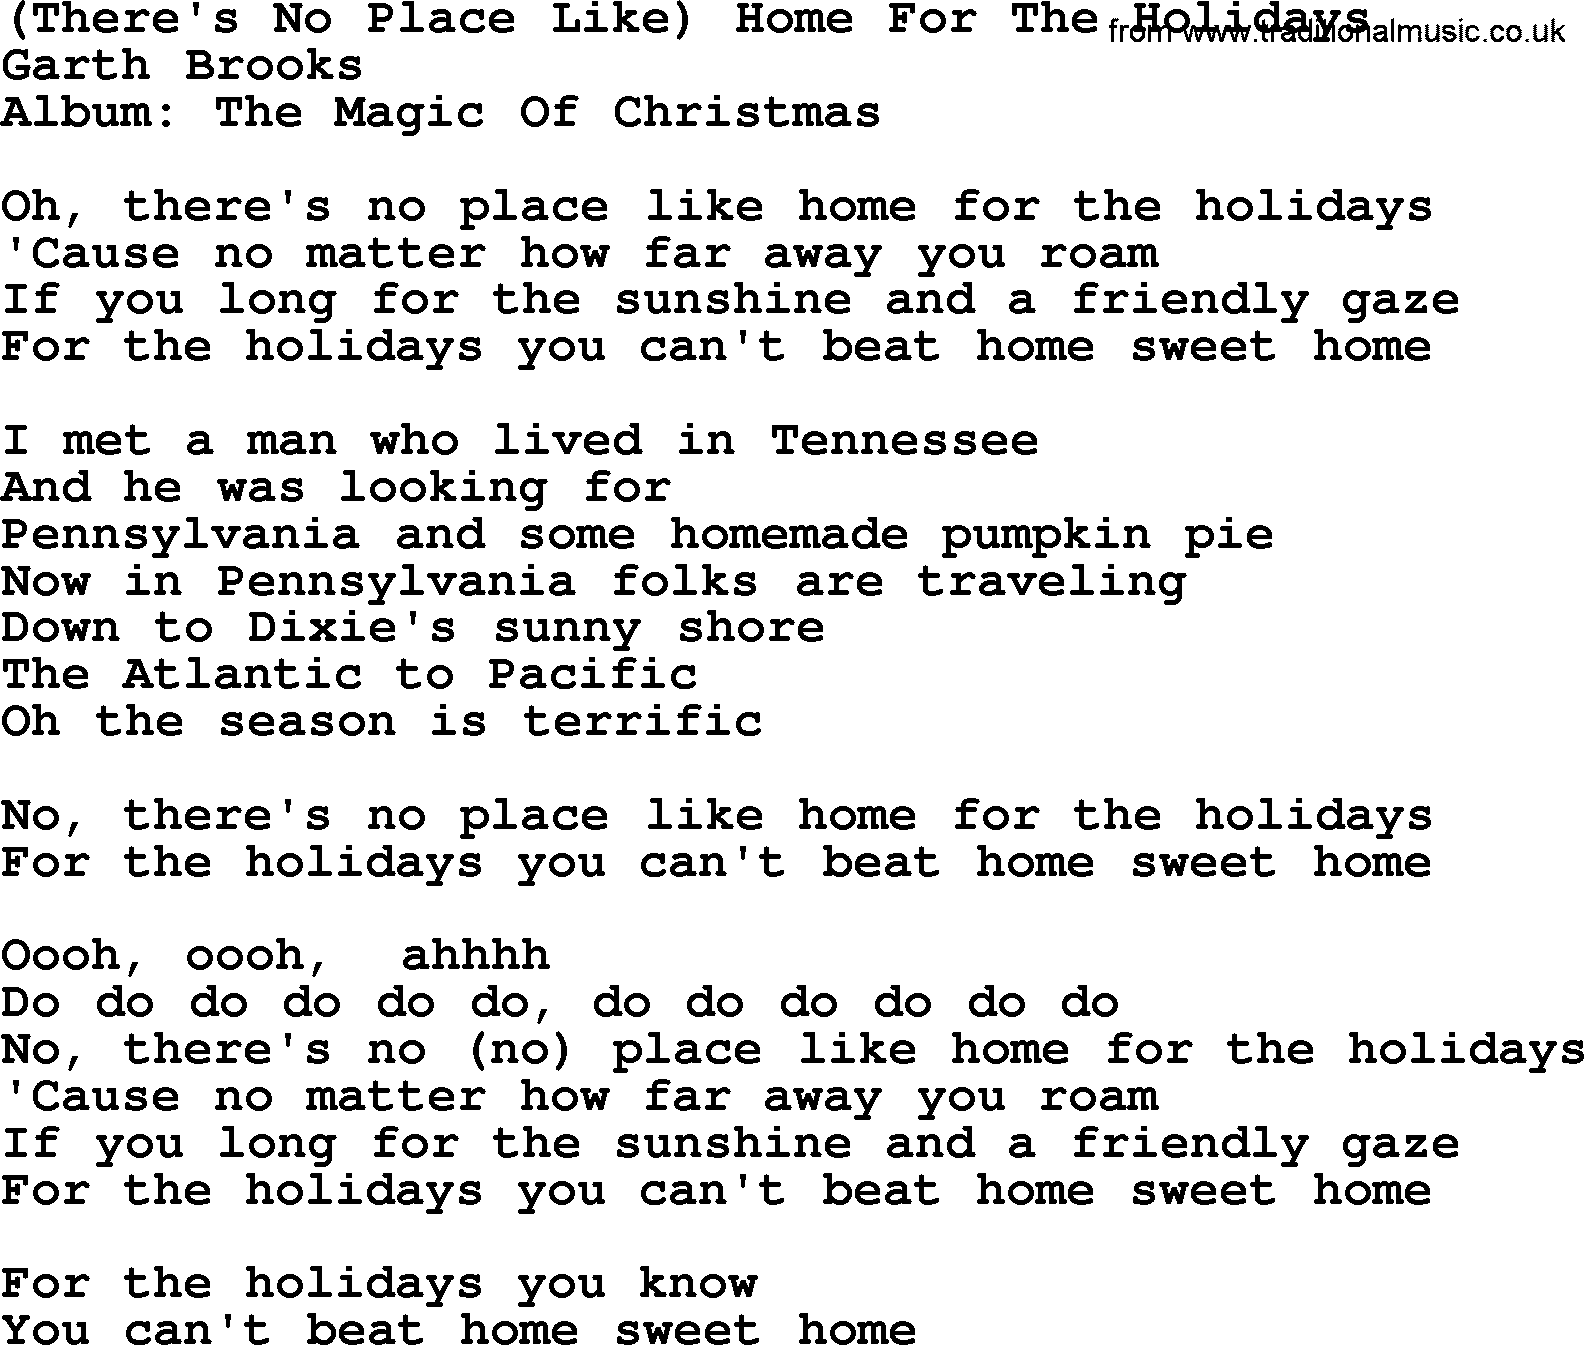 Garth Brooks song: There's No Place Like Home For The Holidays, lyrics